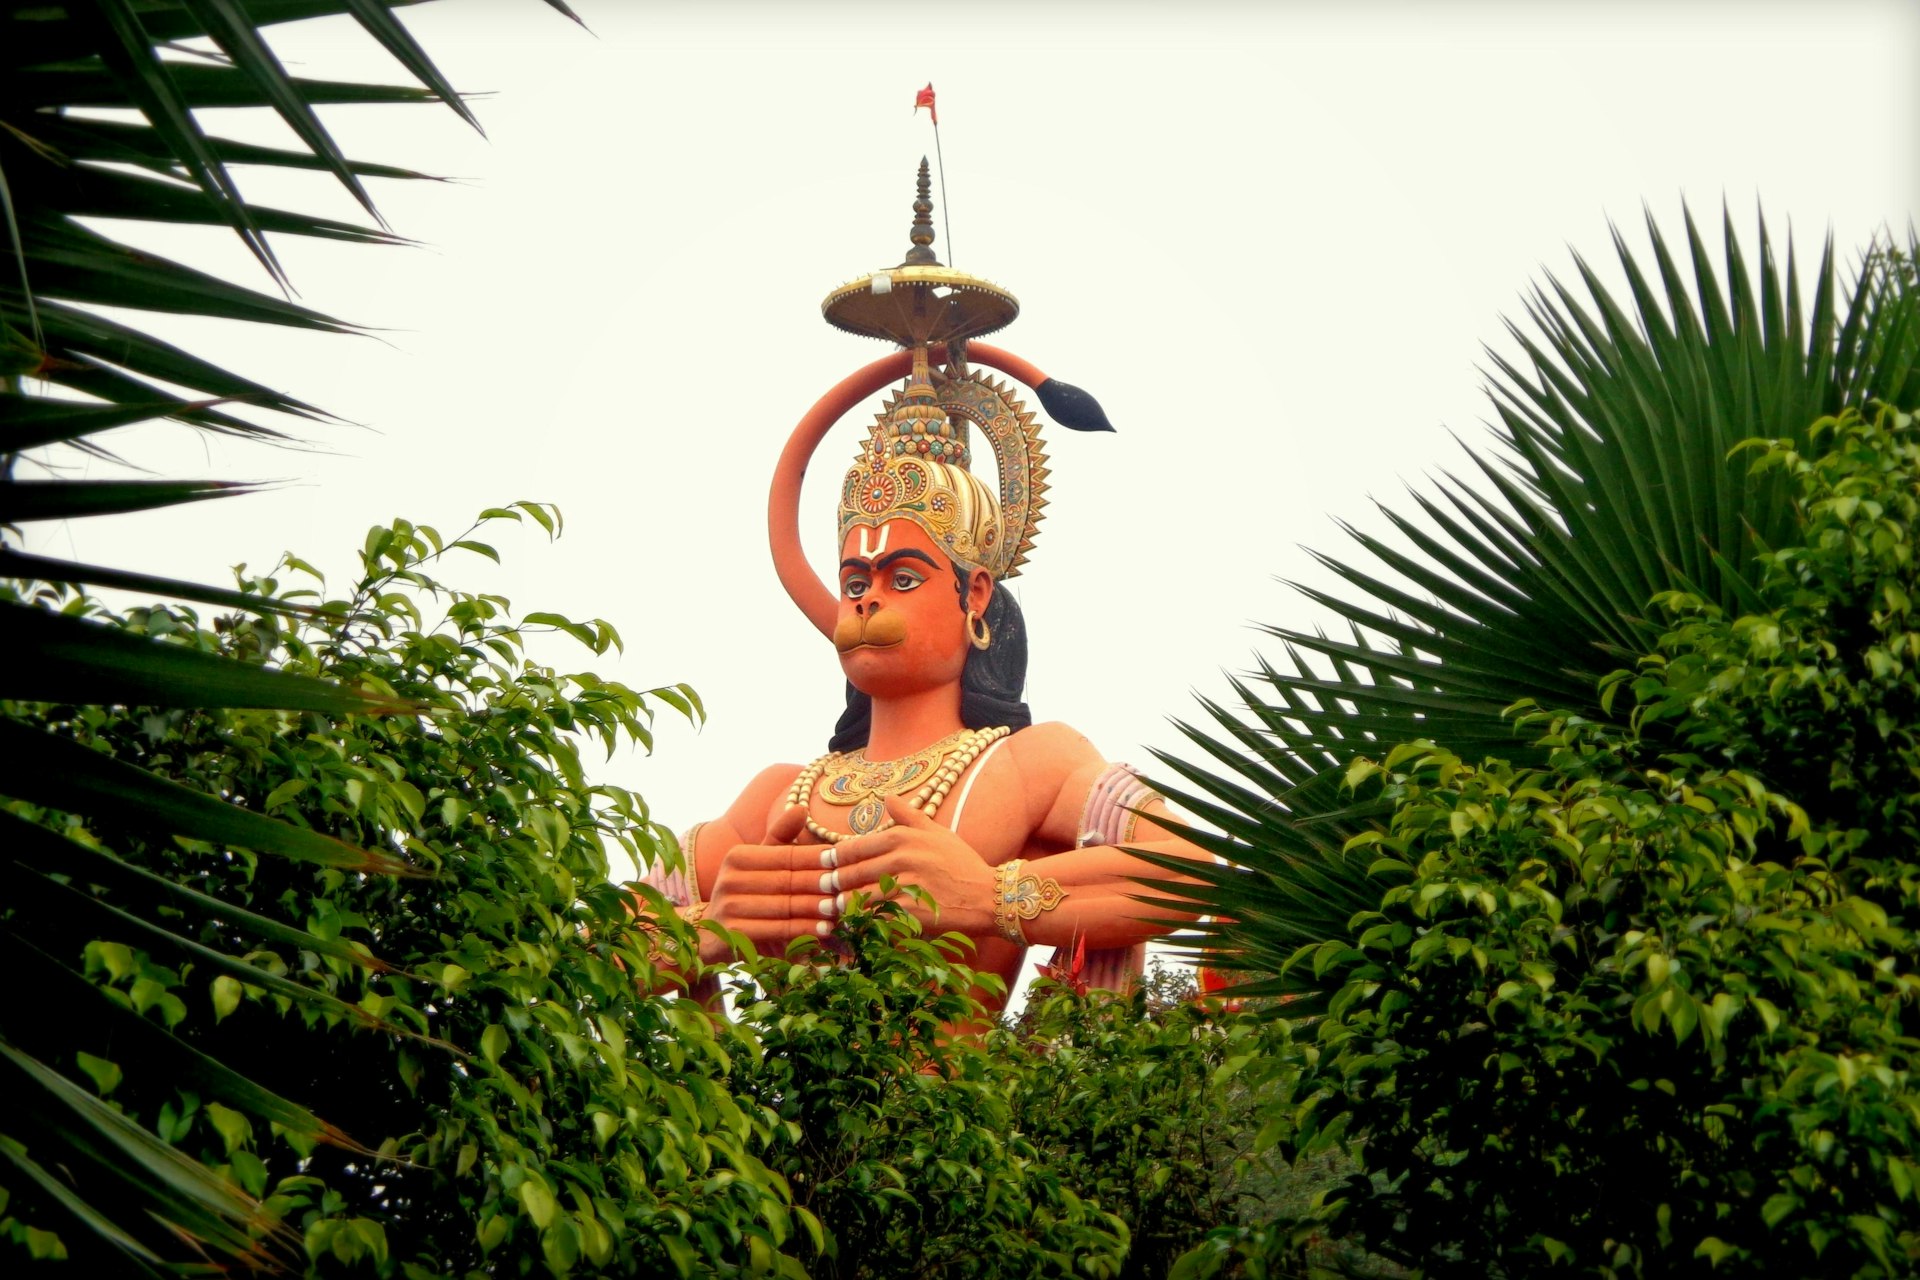 Hanuman Temple in Delhi as seen from behind some palm leaves